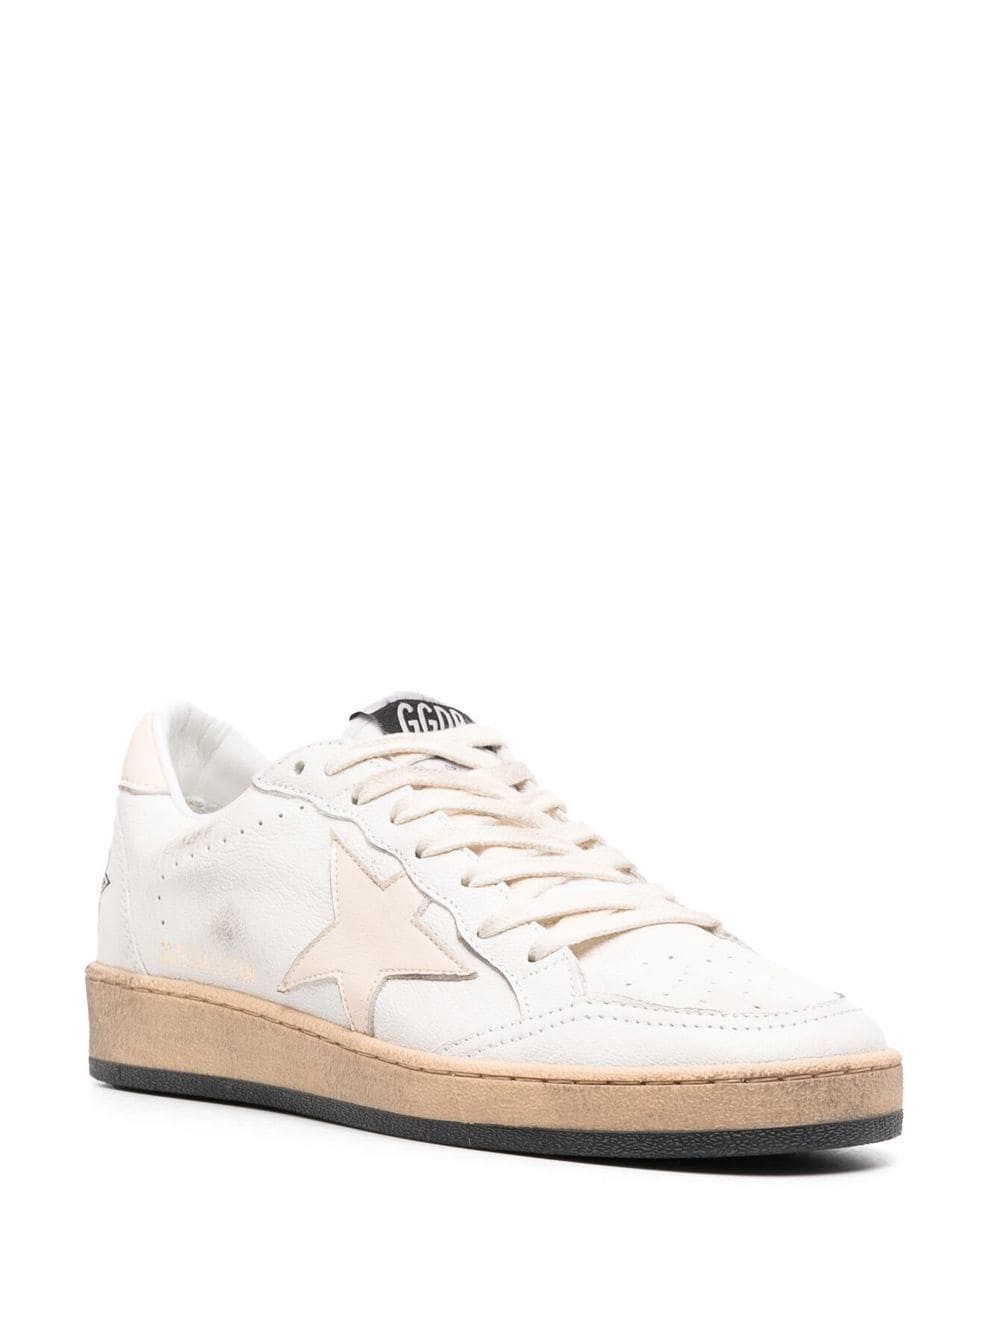 Golden Goose White Ball Star Low-Top Sneakers - Farfetch